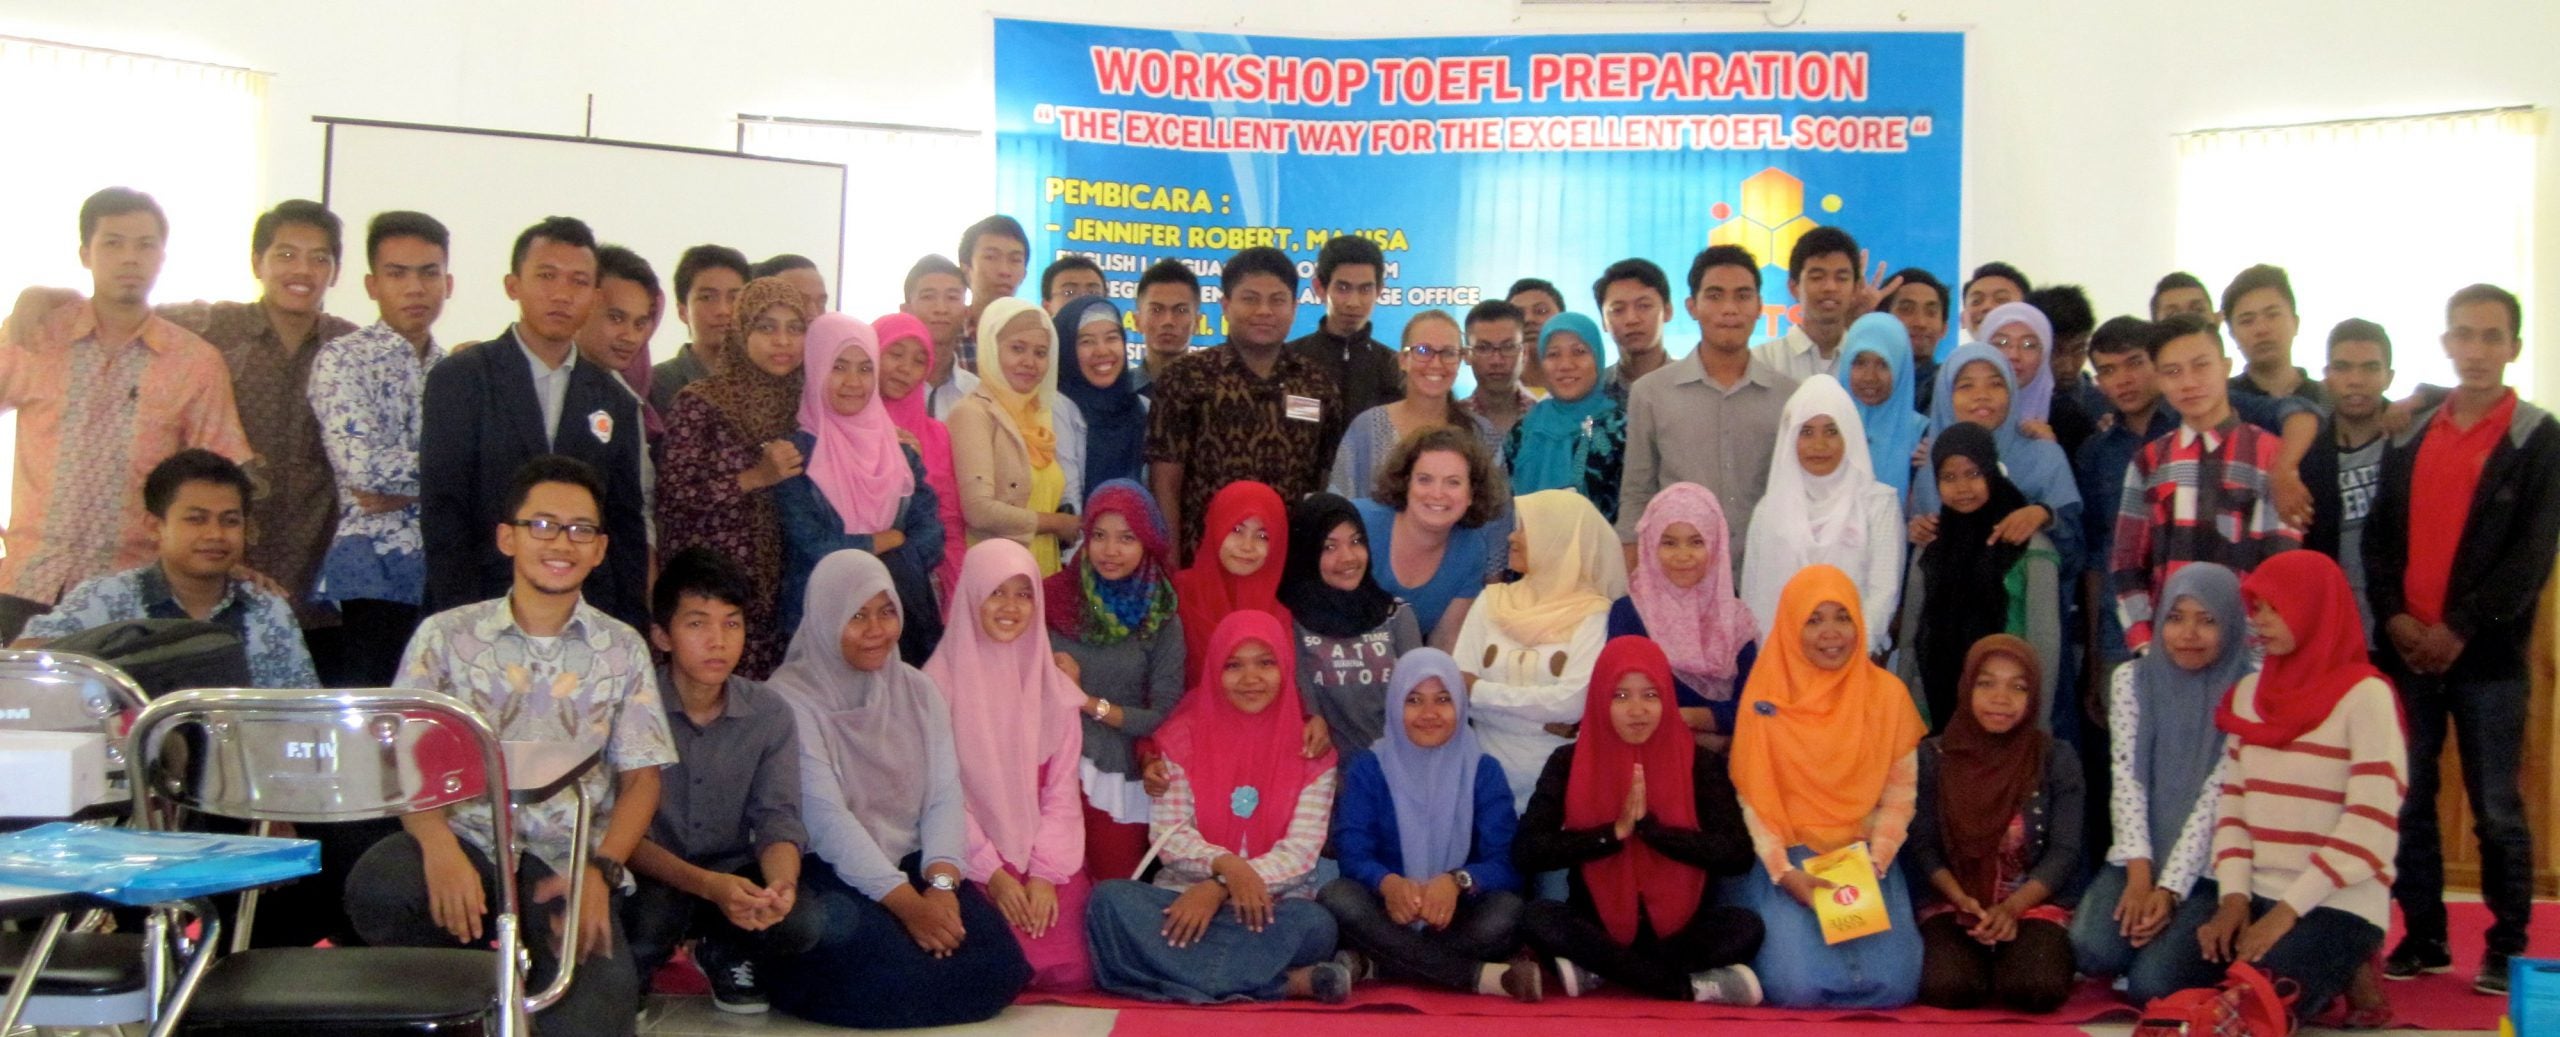 University students and faculty prepare for the TOEFL in a series of four workshops.